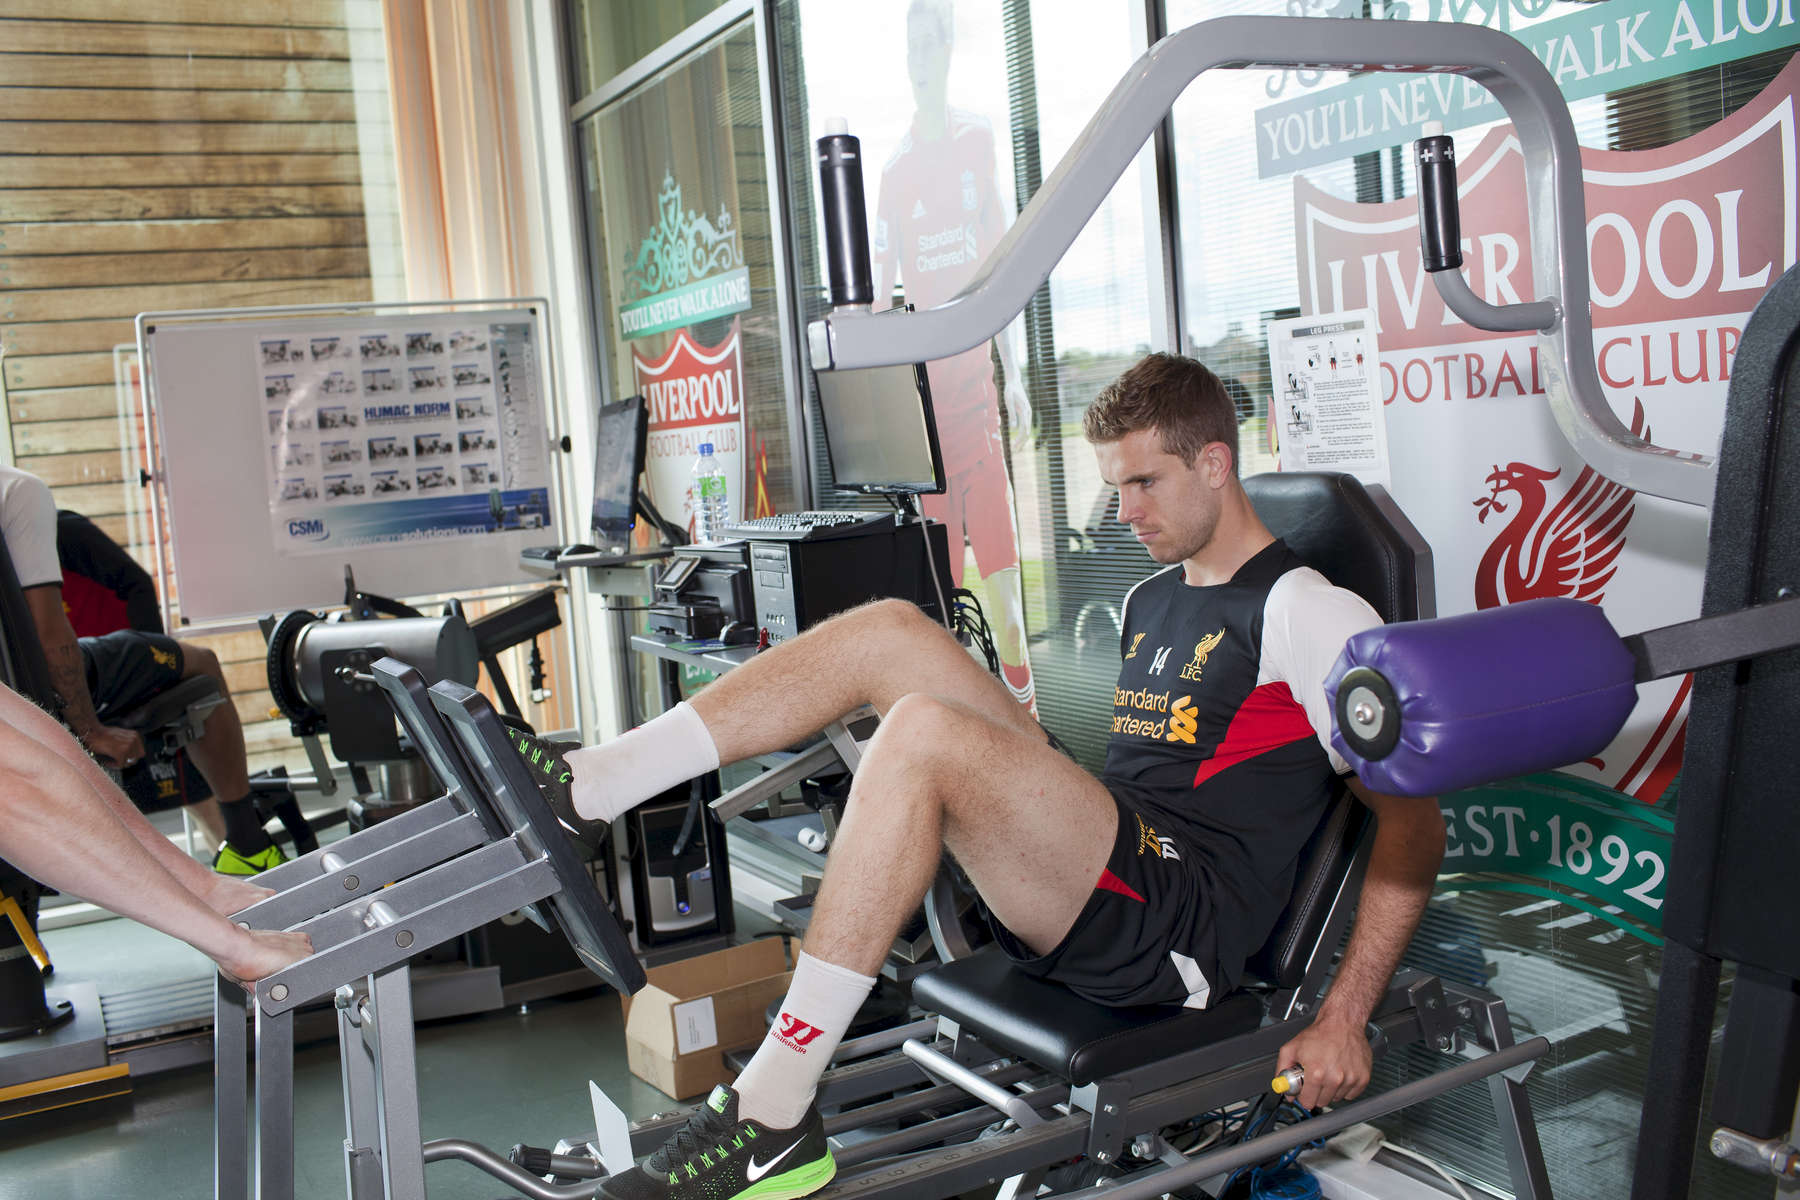 Liverpool FC midfielder Jordan Henderson works out in the gym at Melwood.Melwood is the Liverpool FC training ground, located in the West Derby area of Liverpool. It is seperate from the Liverpool Academy, which is based in Kirkby.Melwood was redeveloped in the early 2000′s with large input from then-manager Gerard Houllier and now features some of the best facilities in Europe. It has been the club’s training ground since the fifties and was previously transformed into a top class facility by Bill Shankly.Facilities include sythetic pitches, rehabilitation rooms, press and meeting rooms, gymnasium, swimming pool, restaurant and recreational facilities.